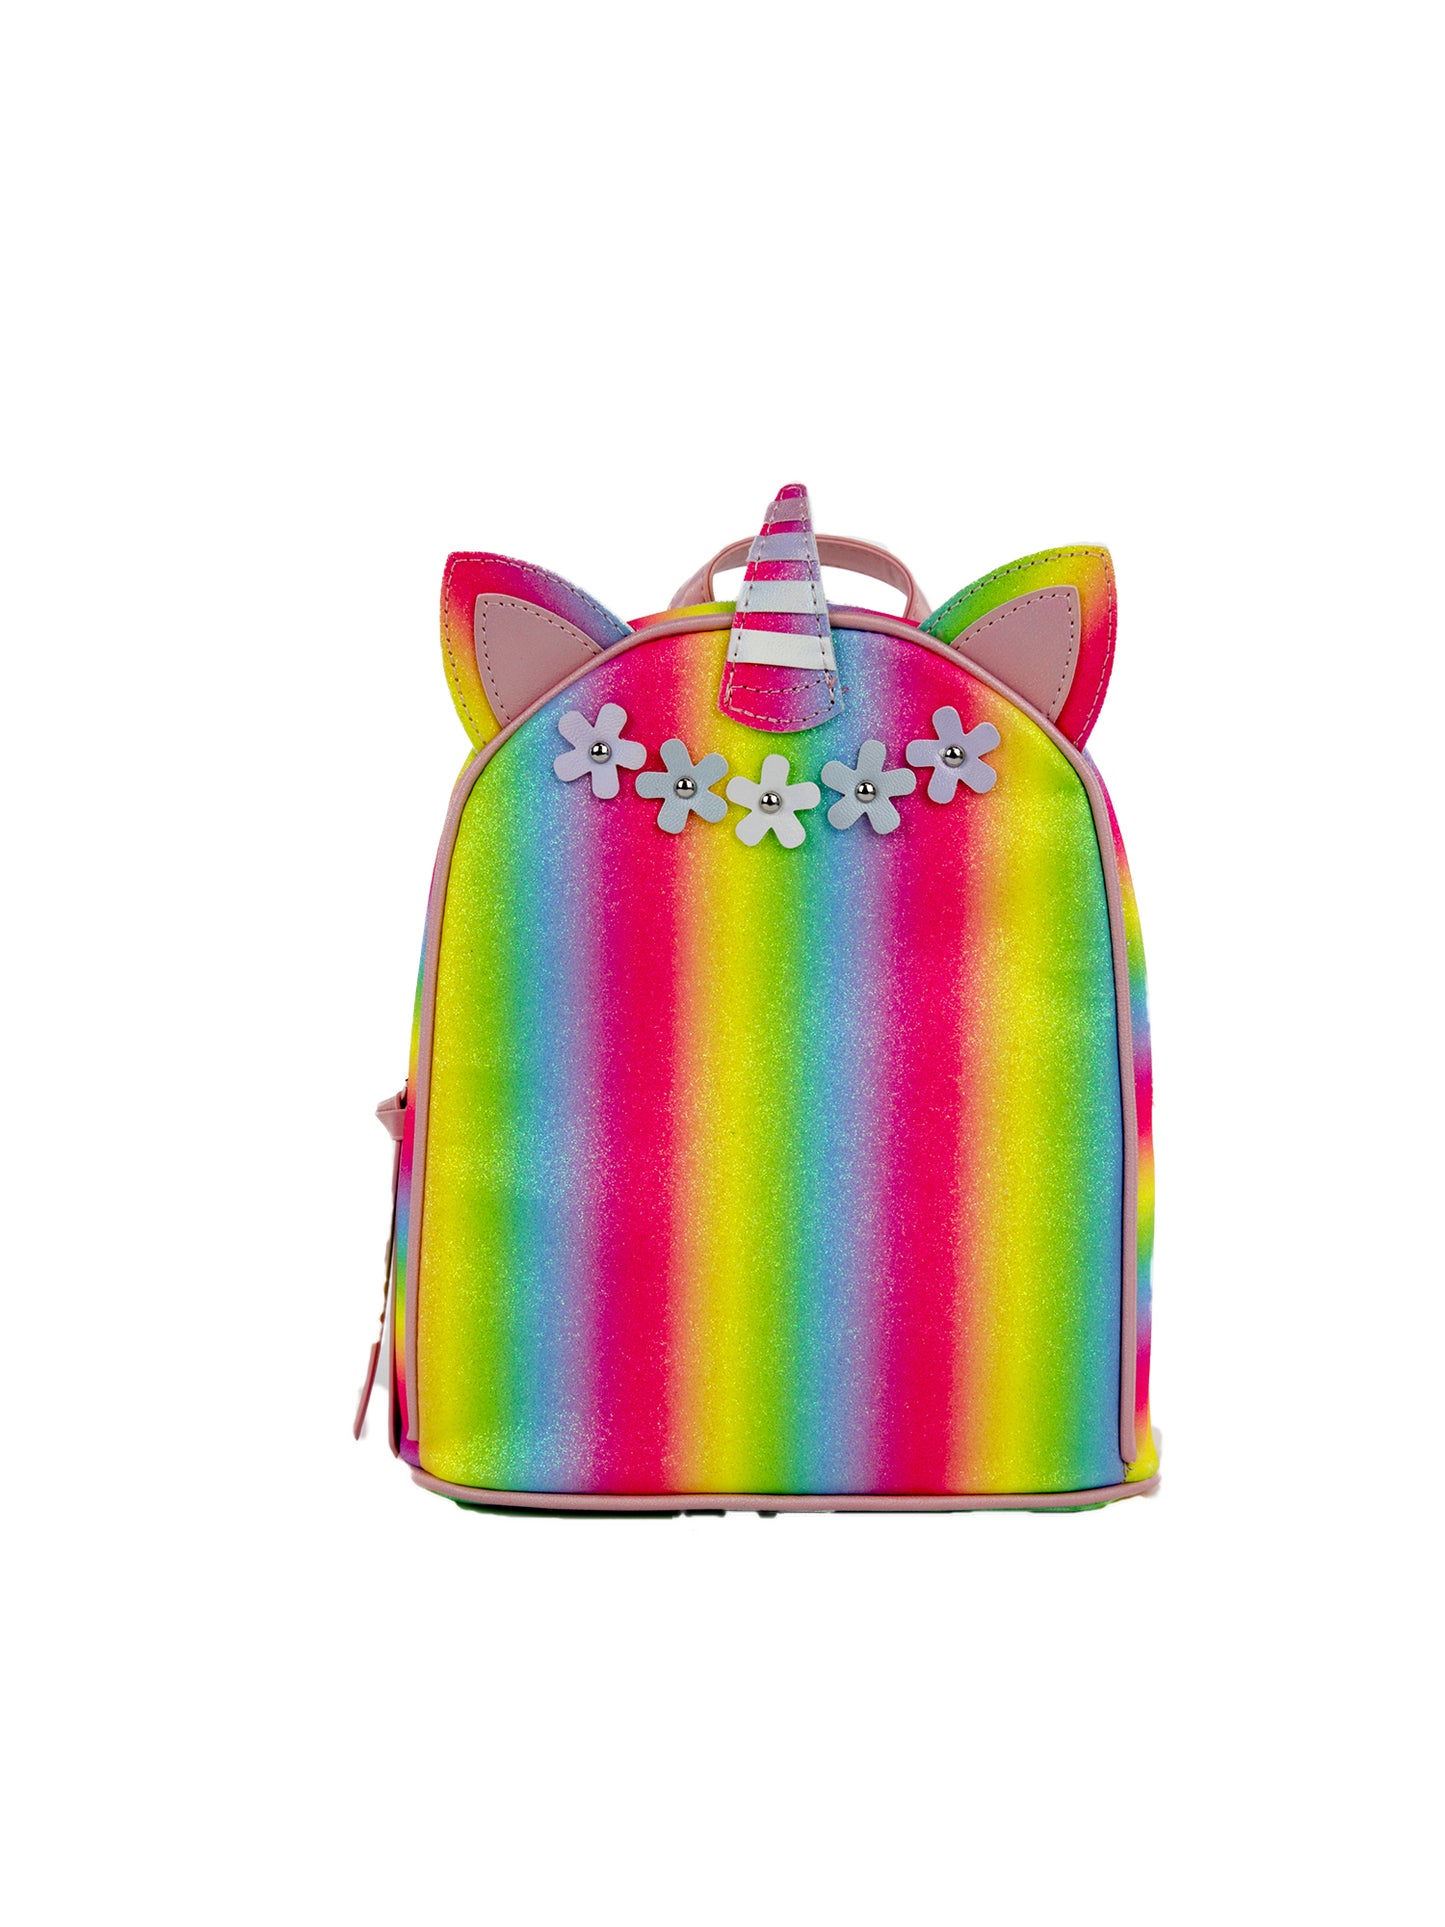 Shop Under One Sky Letty Unicorn Hooded Plush Backpack In Rainbow Pink